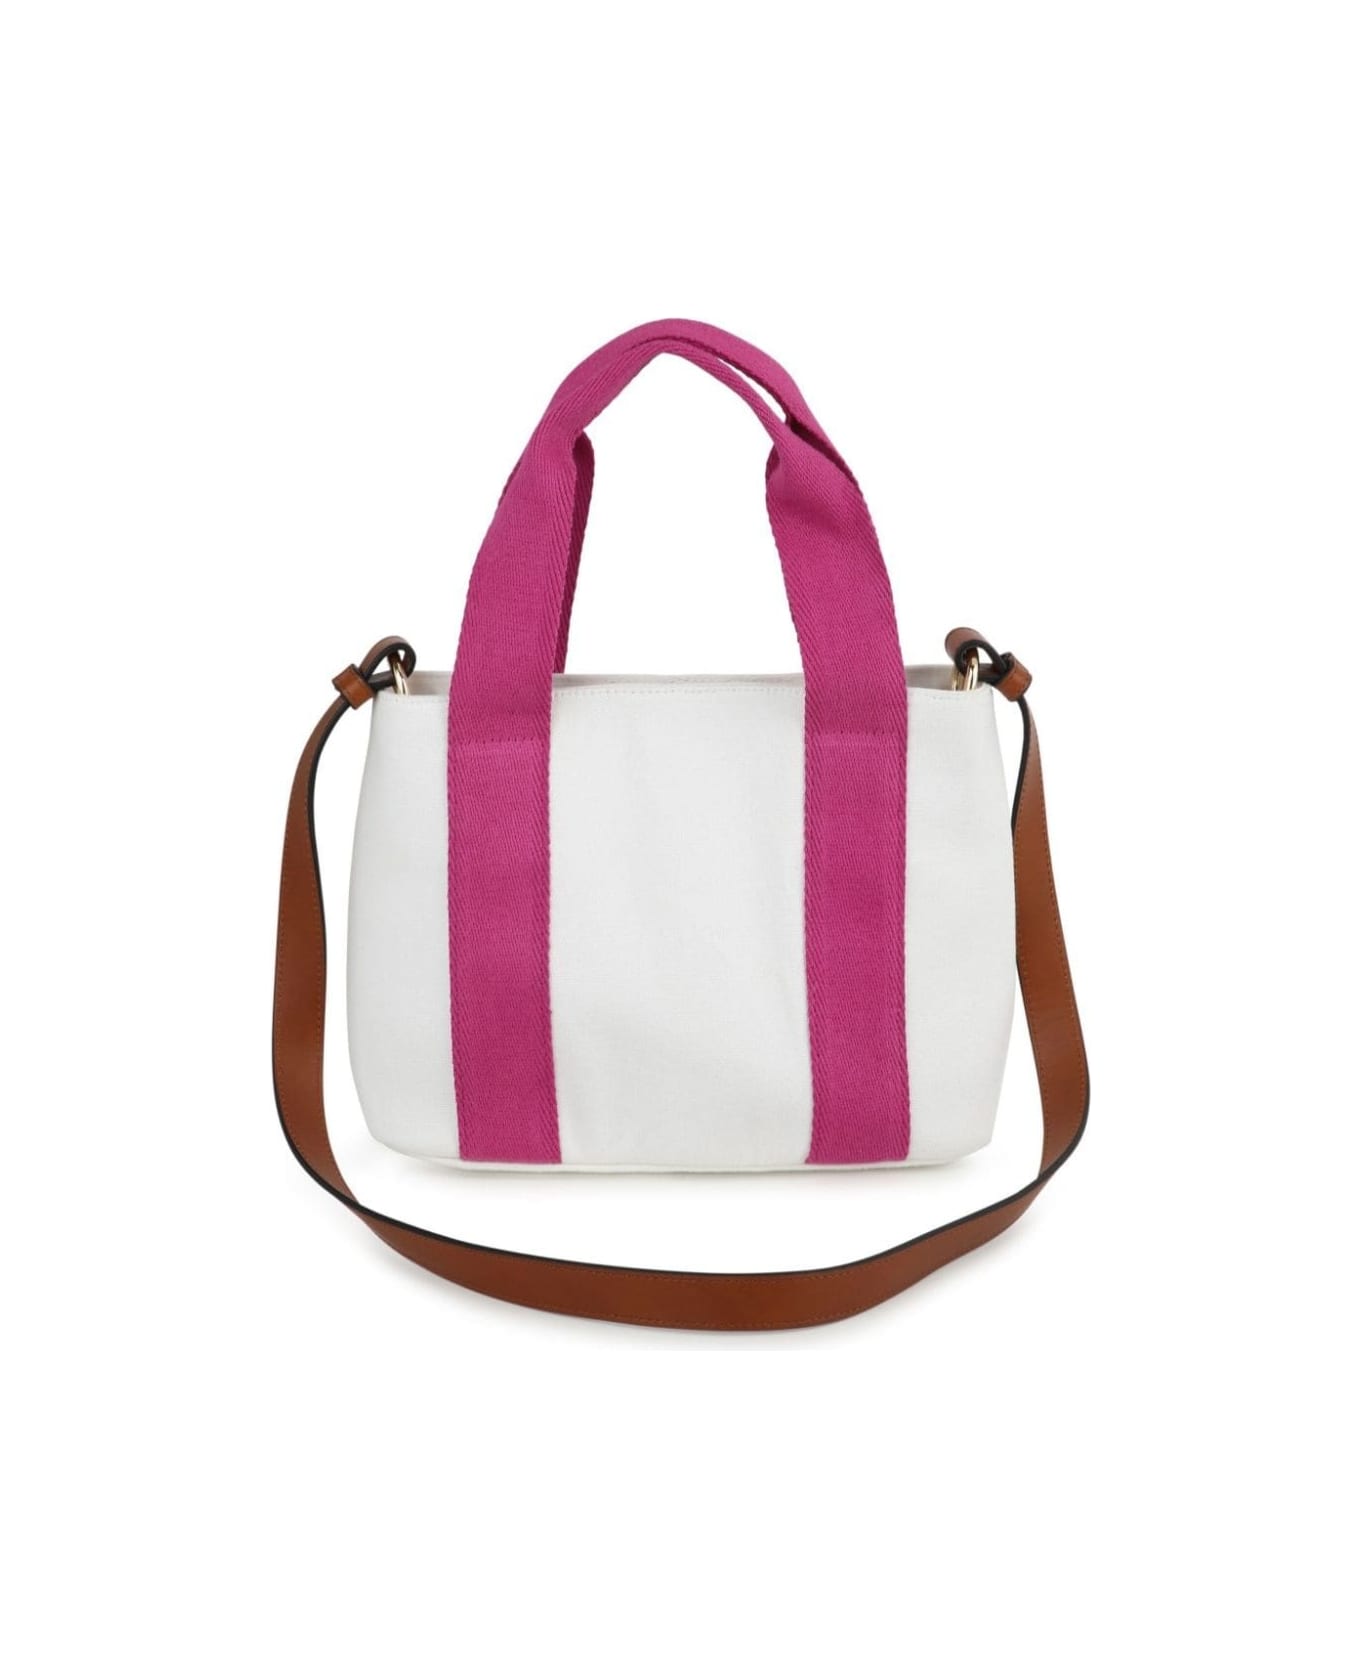 Chloé White And Pink Crossbody Bag With Logo Lettering Detail In Cotton Girl - White アクセサリー＆ギフト